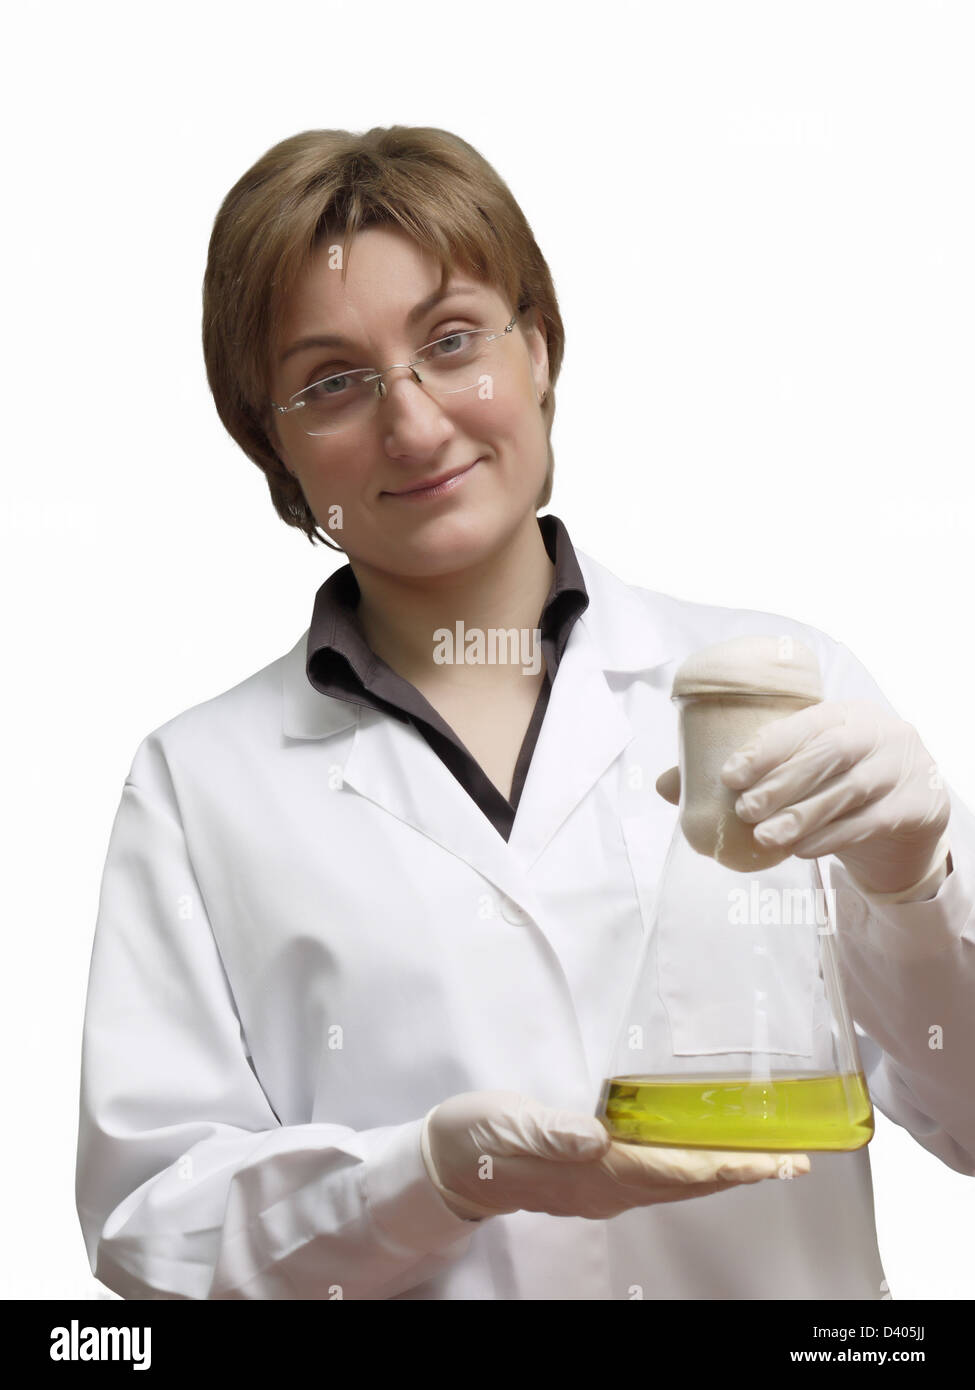 Female laboratory technician holding conical flask with yellow liquid solution Stock Photo